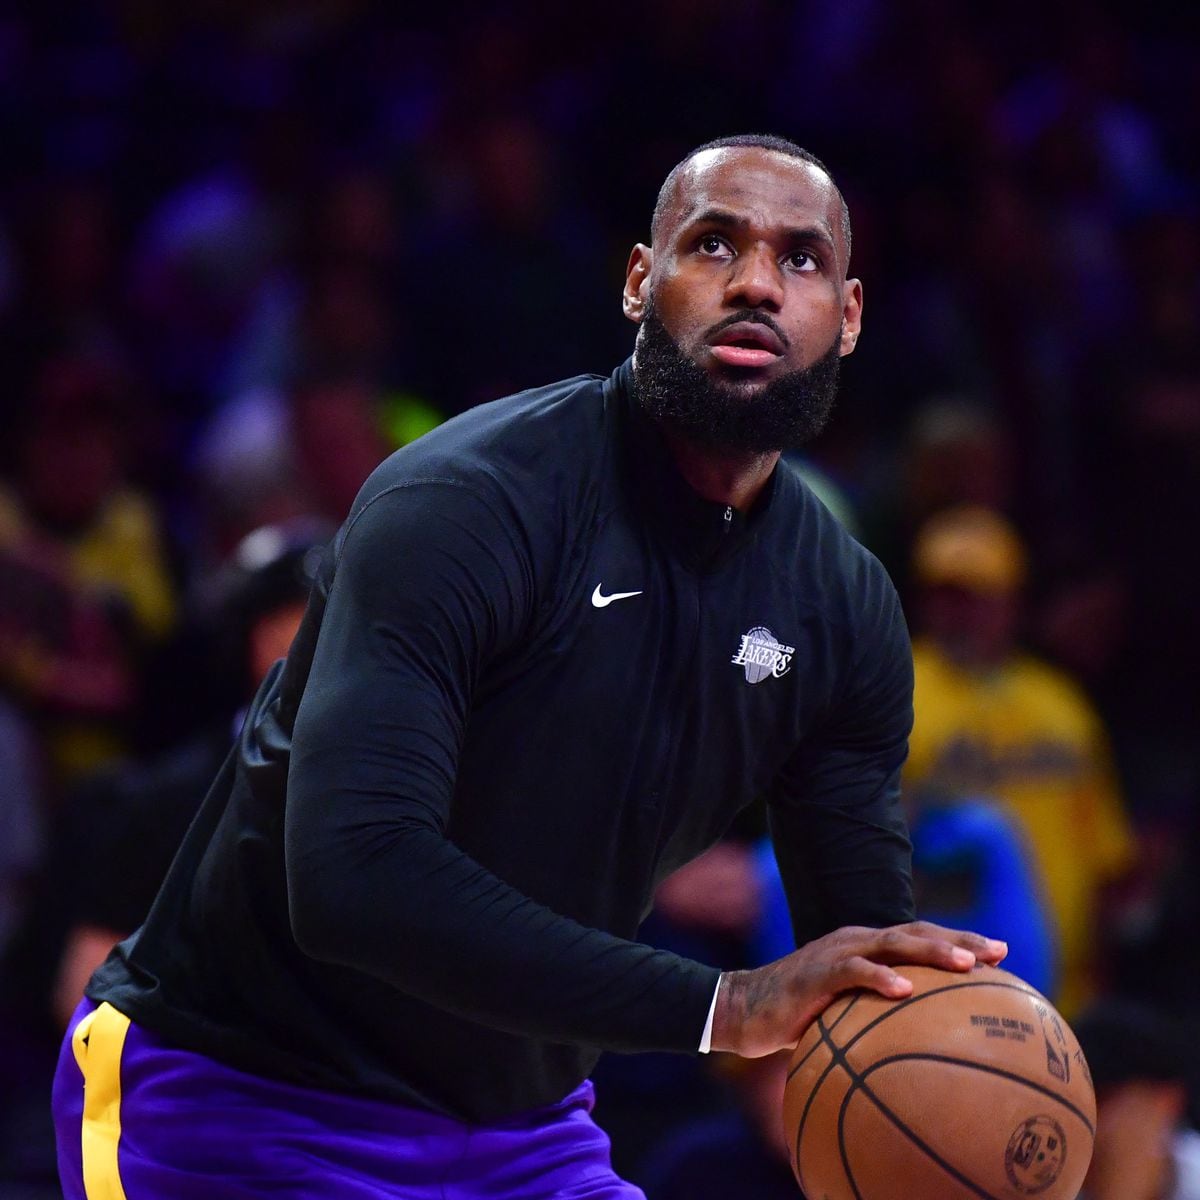 LeBron James, Los Angeles Lakers agree to 2-year, $97.1 million extension  that includes 3rd-year player option - ESPN